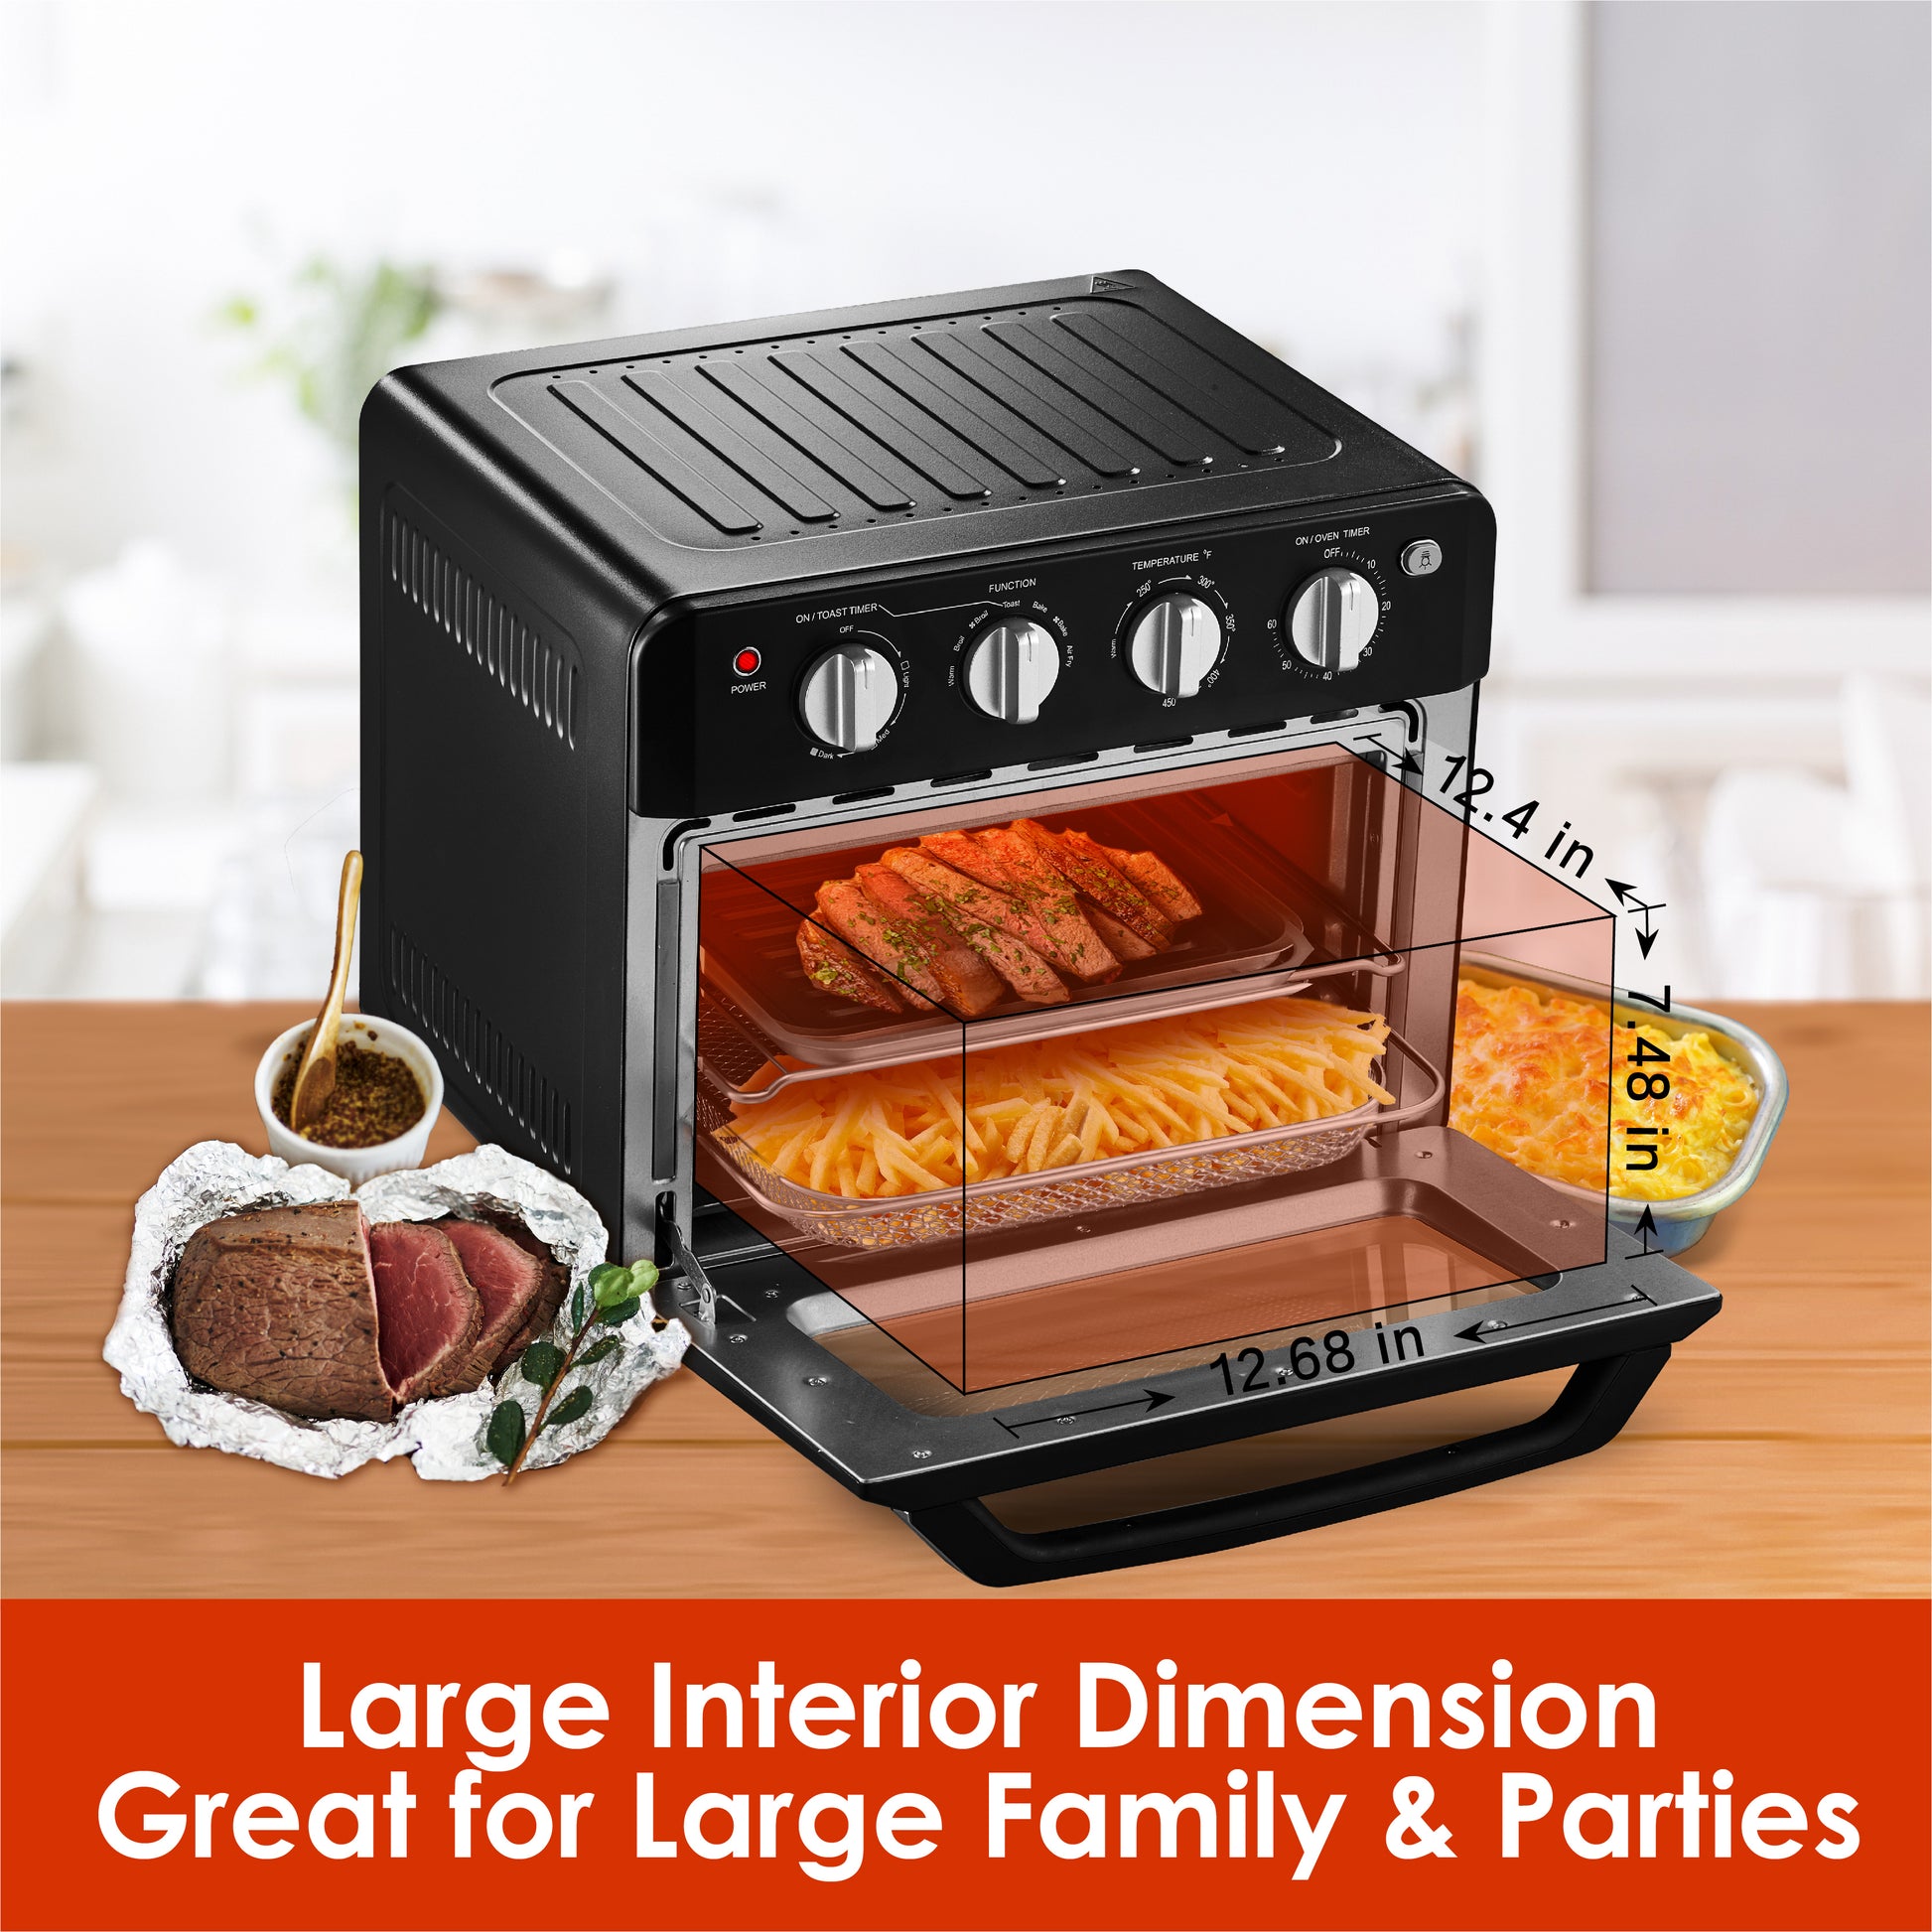 Toaster Oven Air Fryer Combo, AUMATE Kitchen in the box Countertop  Convection Oven, Airfryer,Knob Control Pizza Oven with Timer/Auto-Off, 4